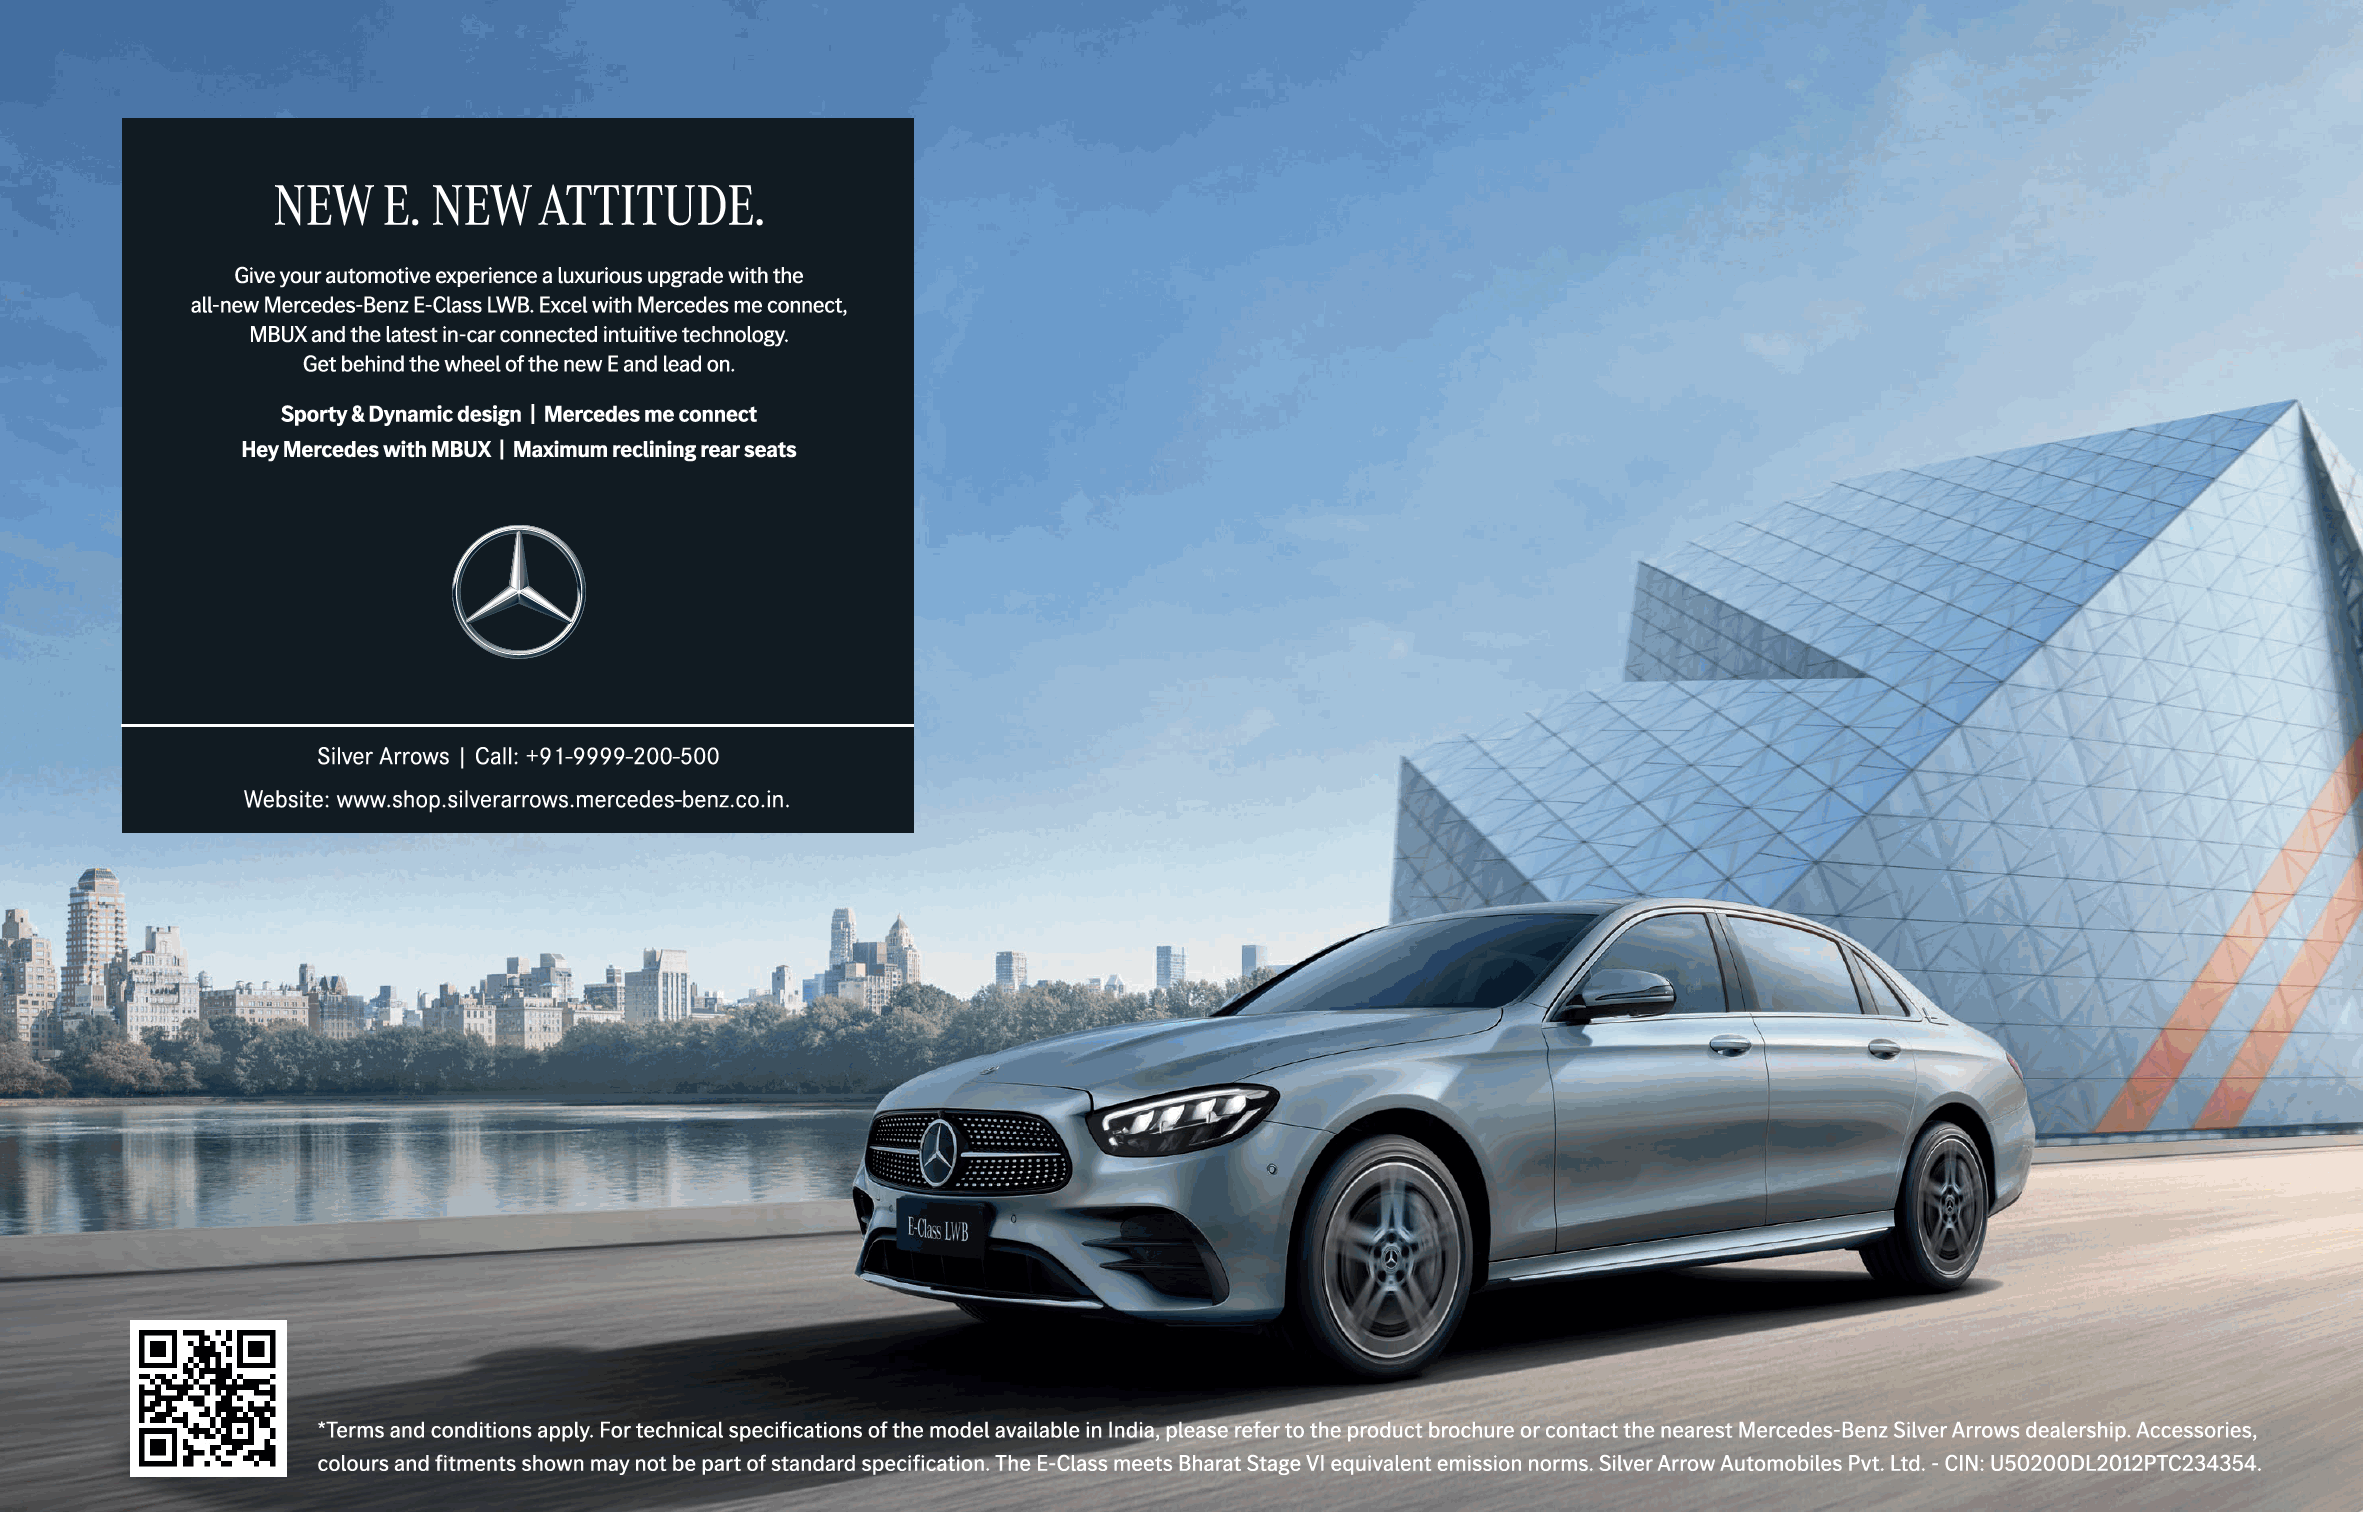 mercedes-benz-e-class-lbw-sporty-and-dynamic-design-ad-times-of-india-delhi-10-7-2021